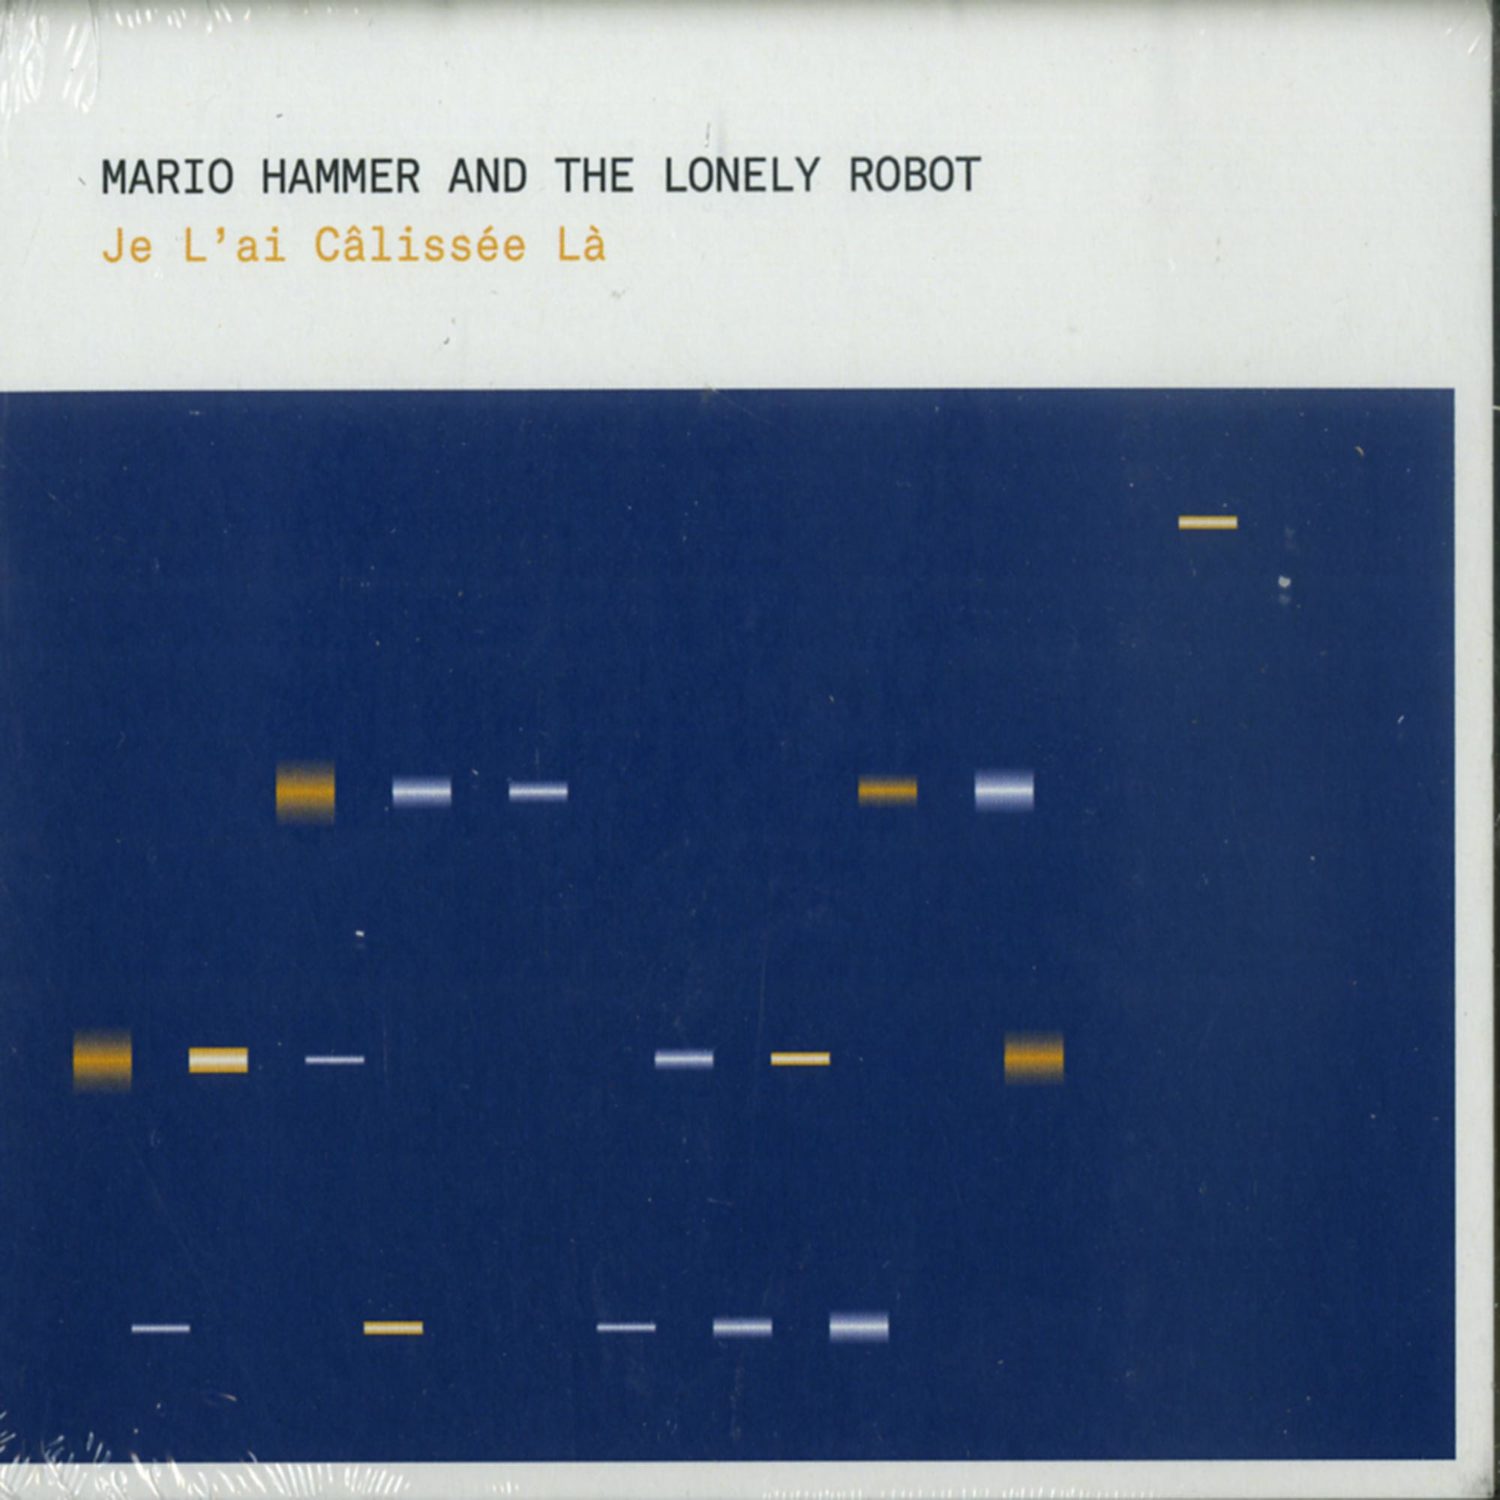 Mario Hammer And The Lonely Robot - JE LAI CALISSEE LA 